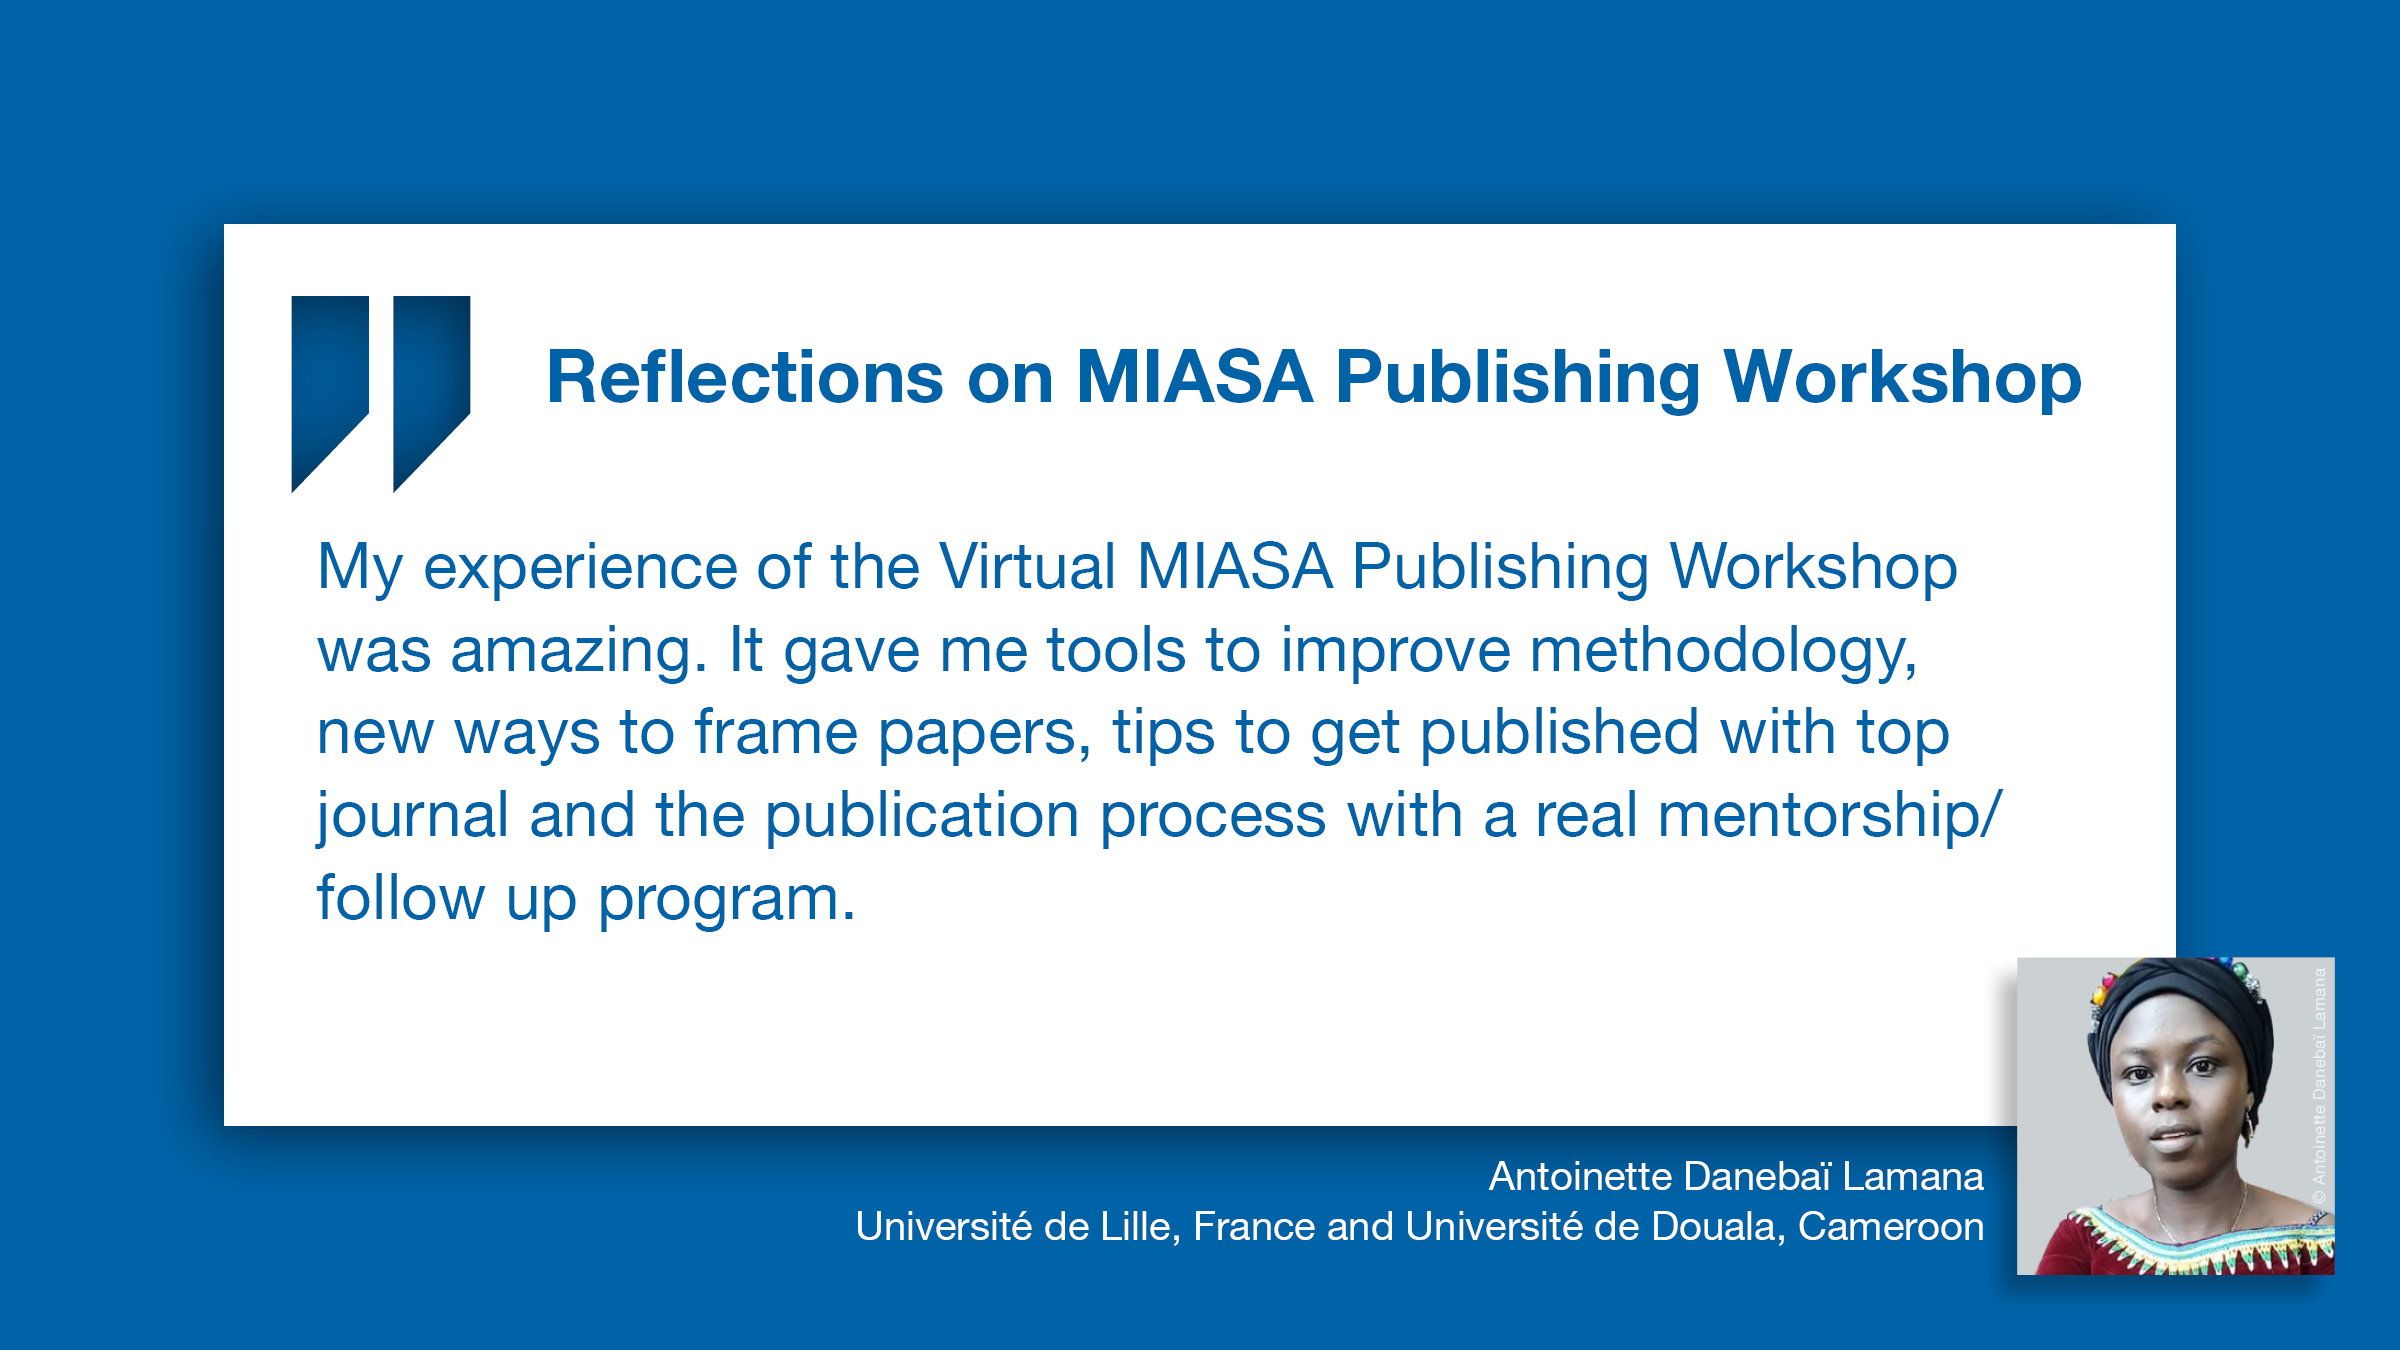 Reflections on MIASA Publishing Workshop: Quote by Lamana